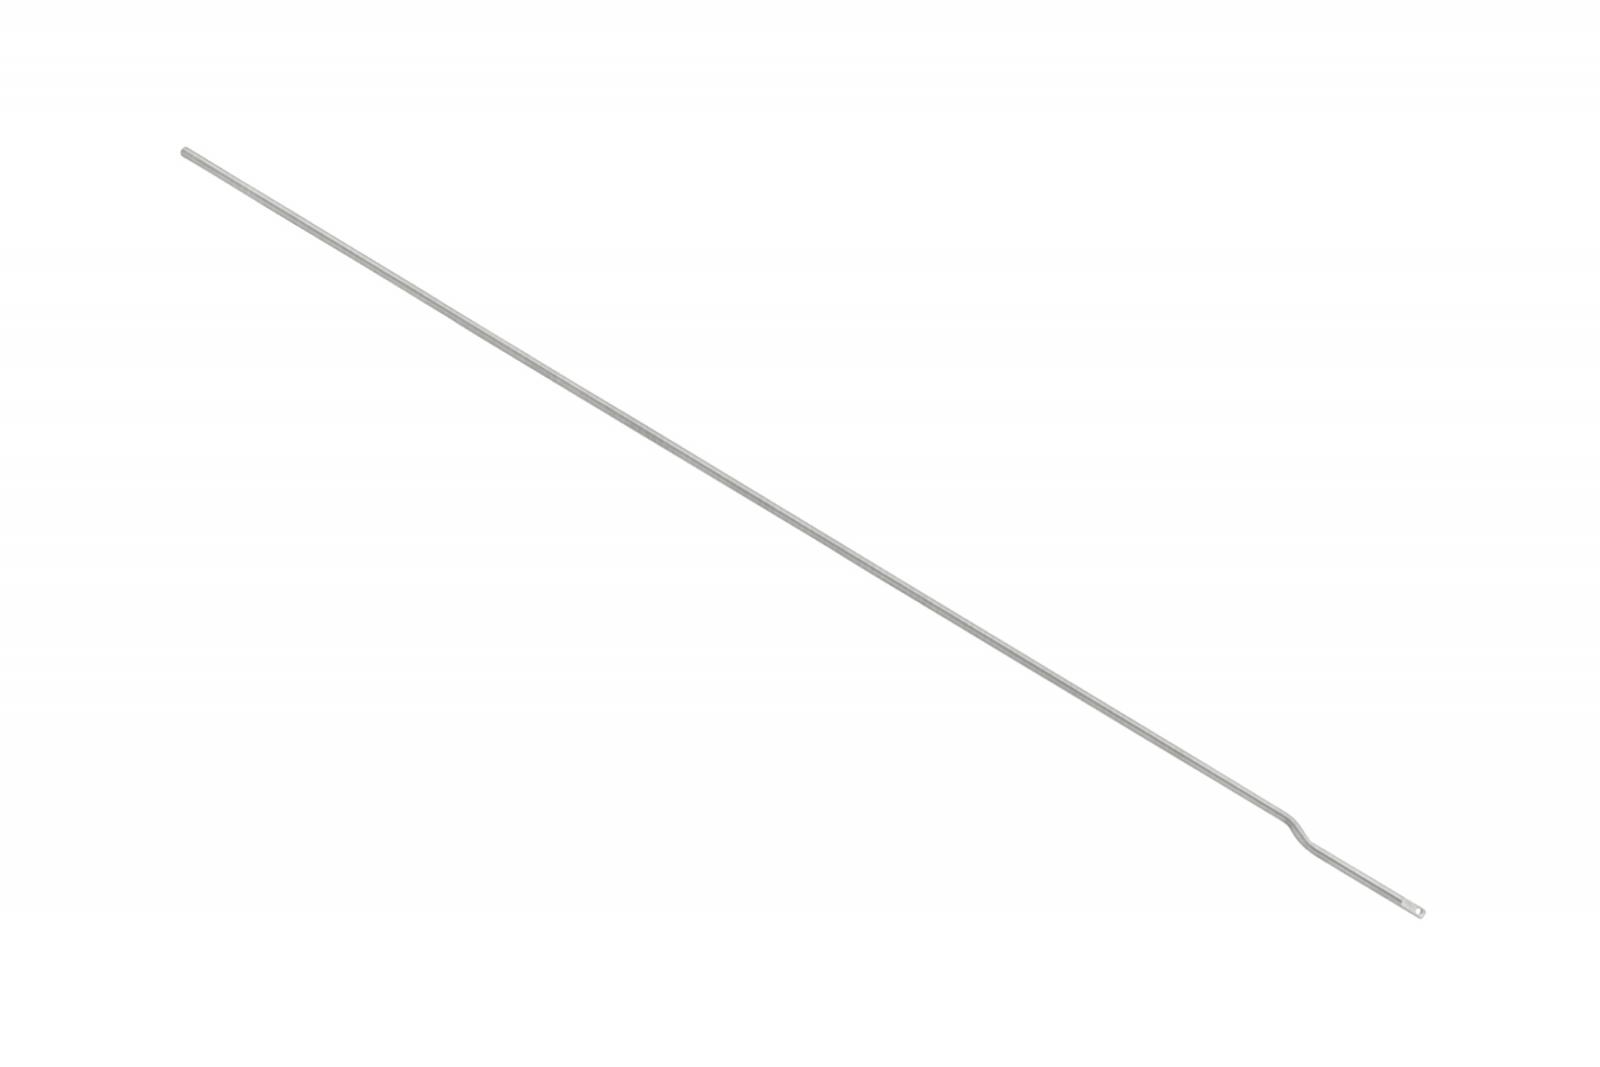 TapeTech® Rod. Part number 191007